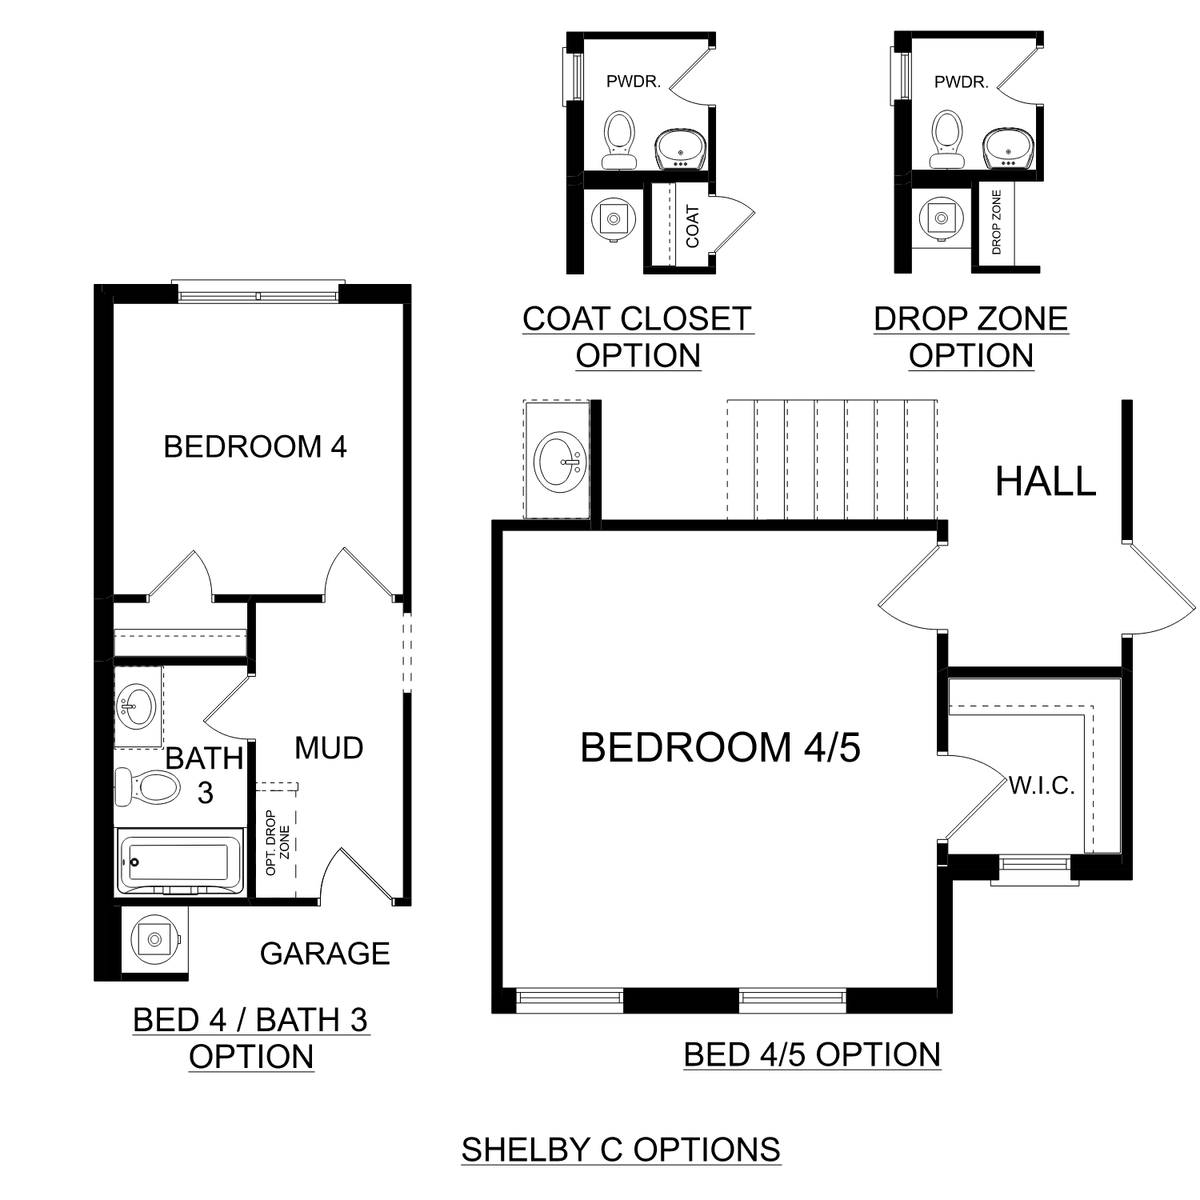 3 - The Shelby C buildable floor plan layout in Davidson Homes' Spragins Cove community.